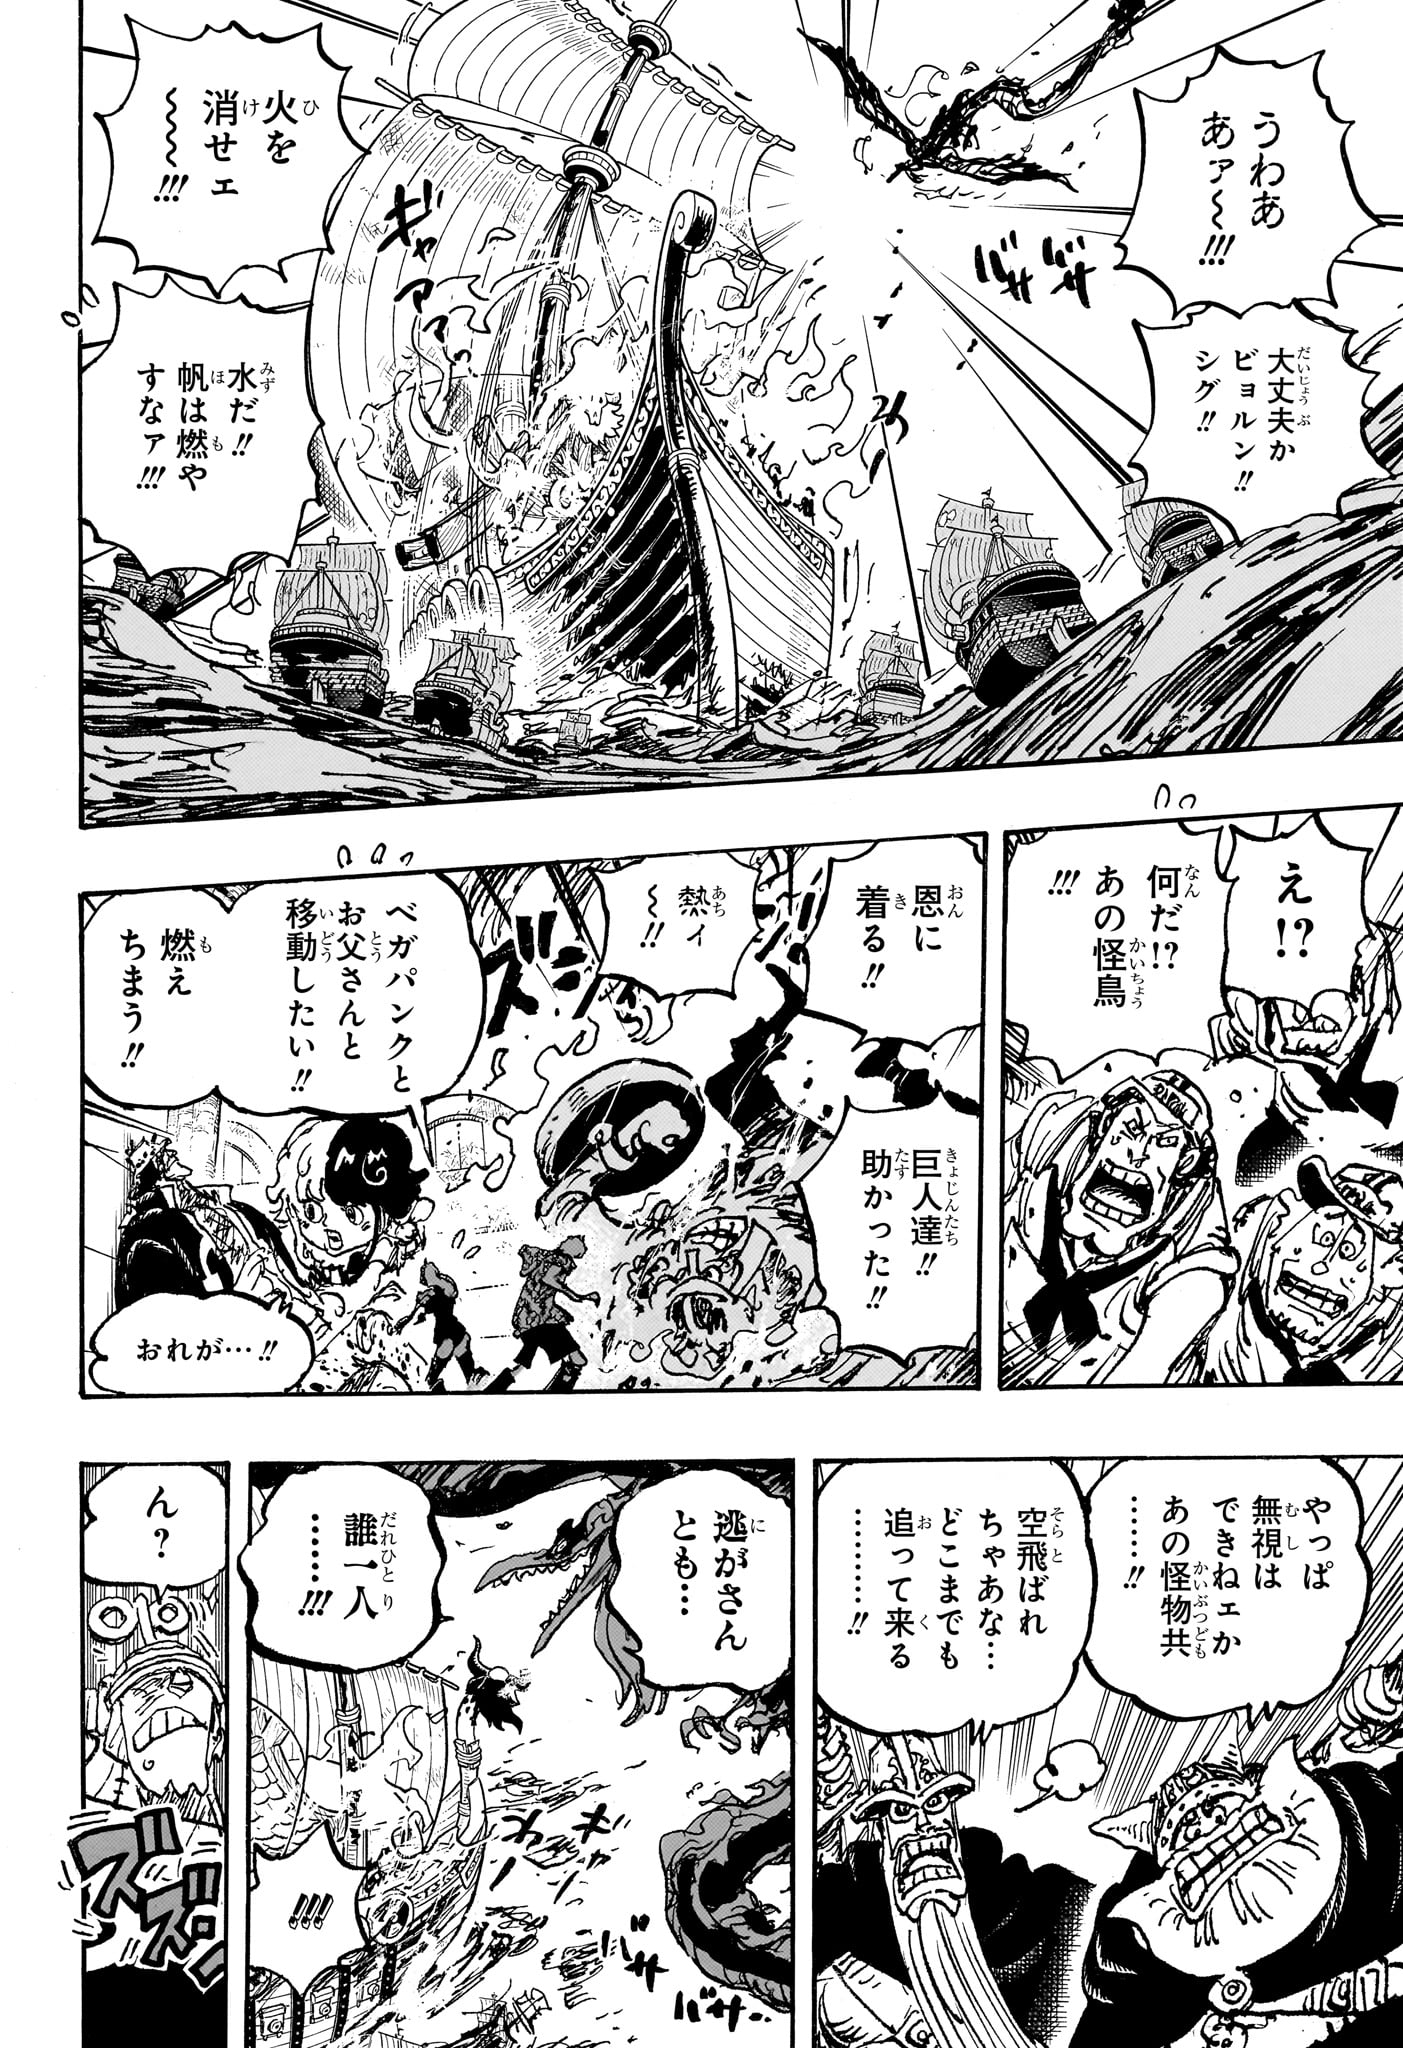 One Piece - Chapter 1118 - Page 10